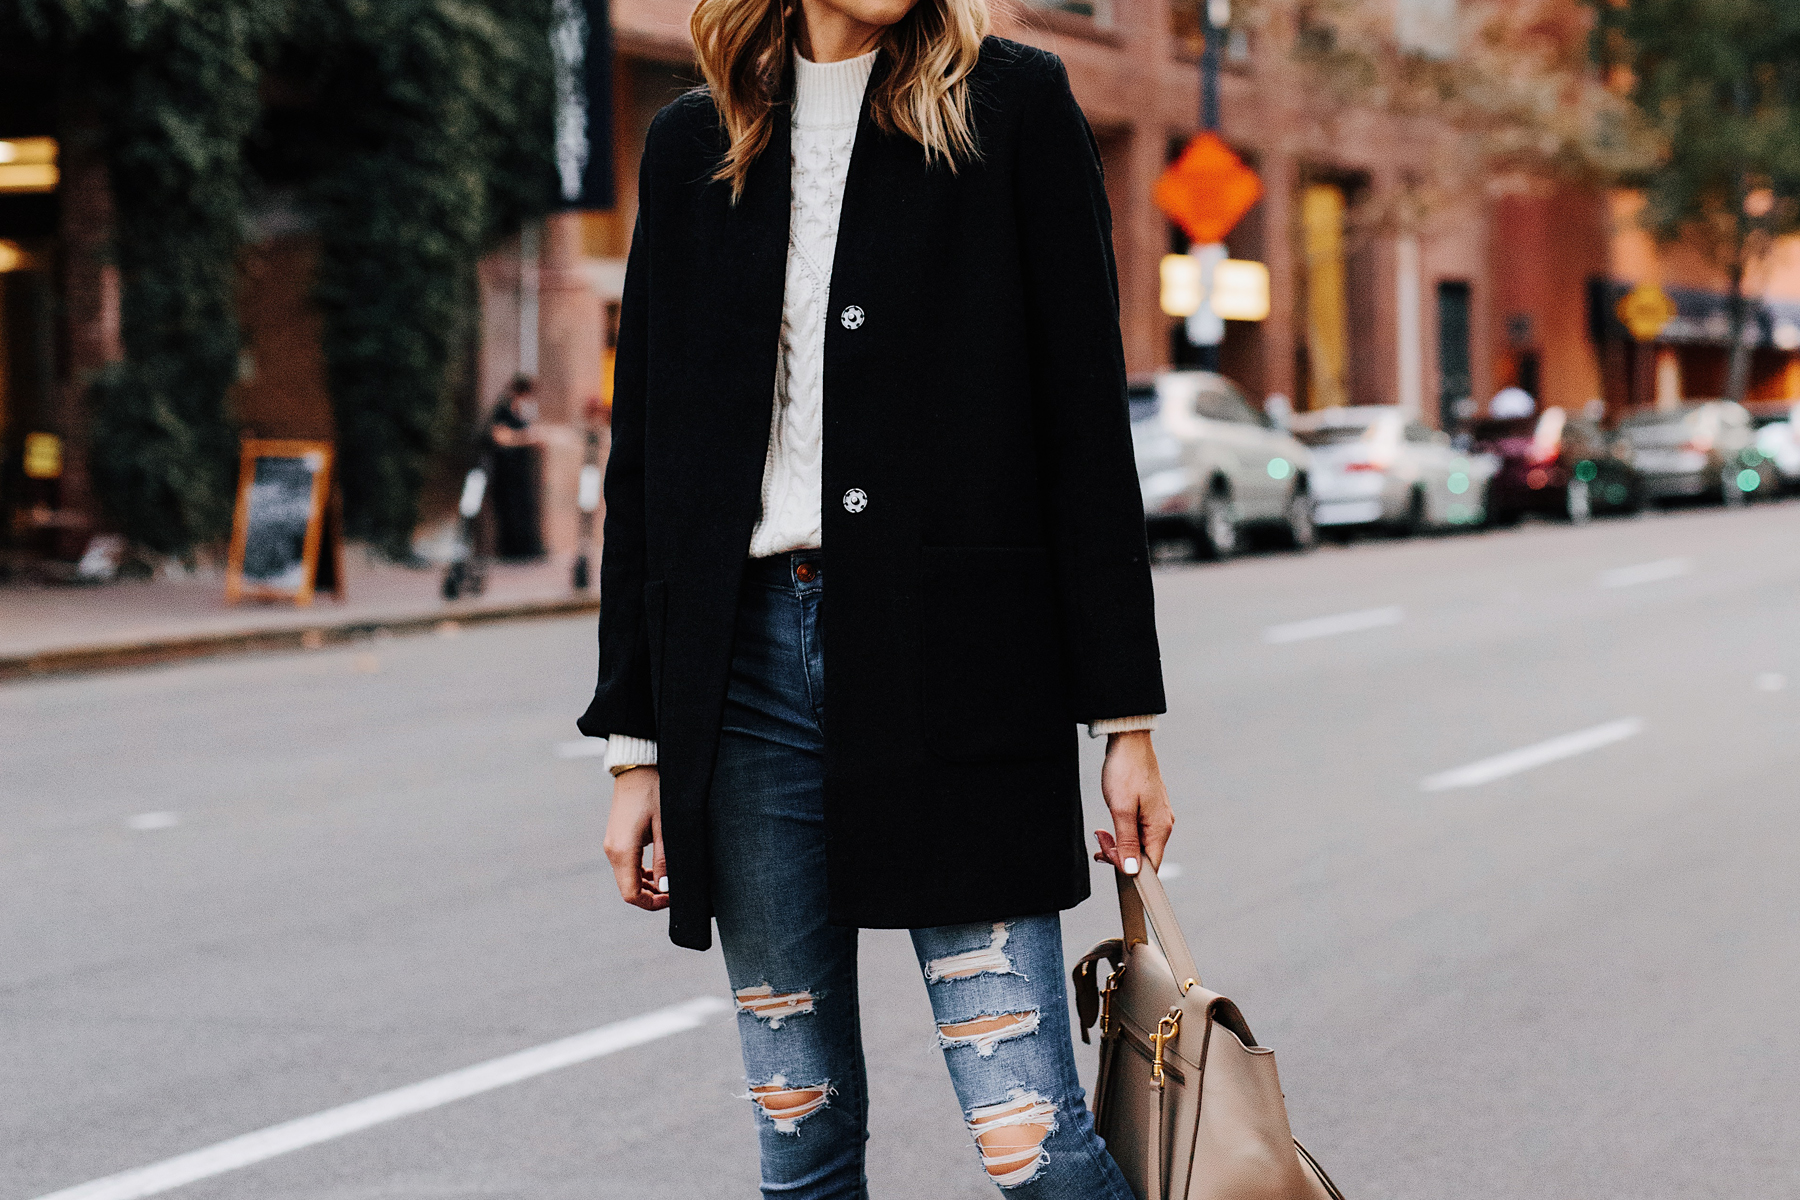 Blonde Woman Wearing Abercrombie Black Wool Coat Cable Knit White Sweater Denim Ripped Skinny Jeans Outfit Fashion Jackson San Diego Fashion Blogger Street Style